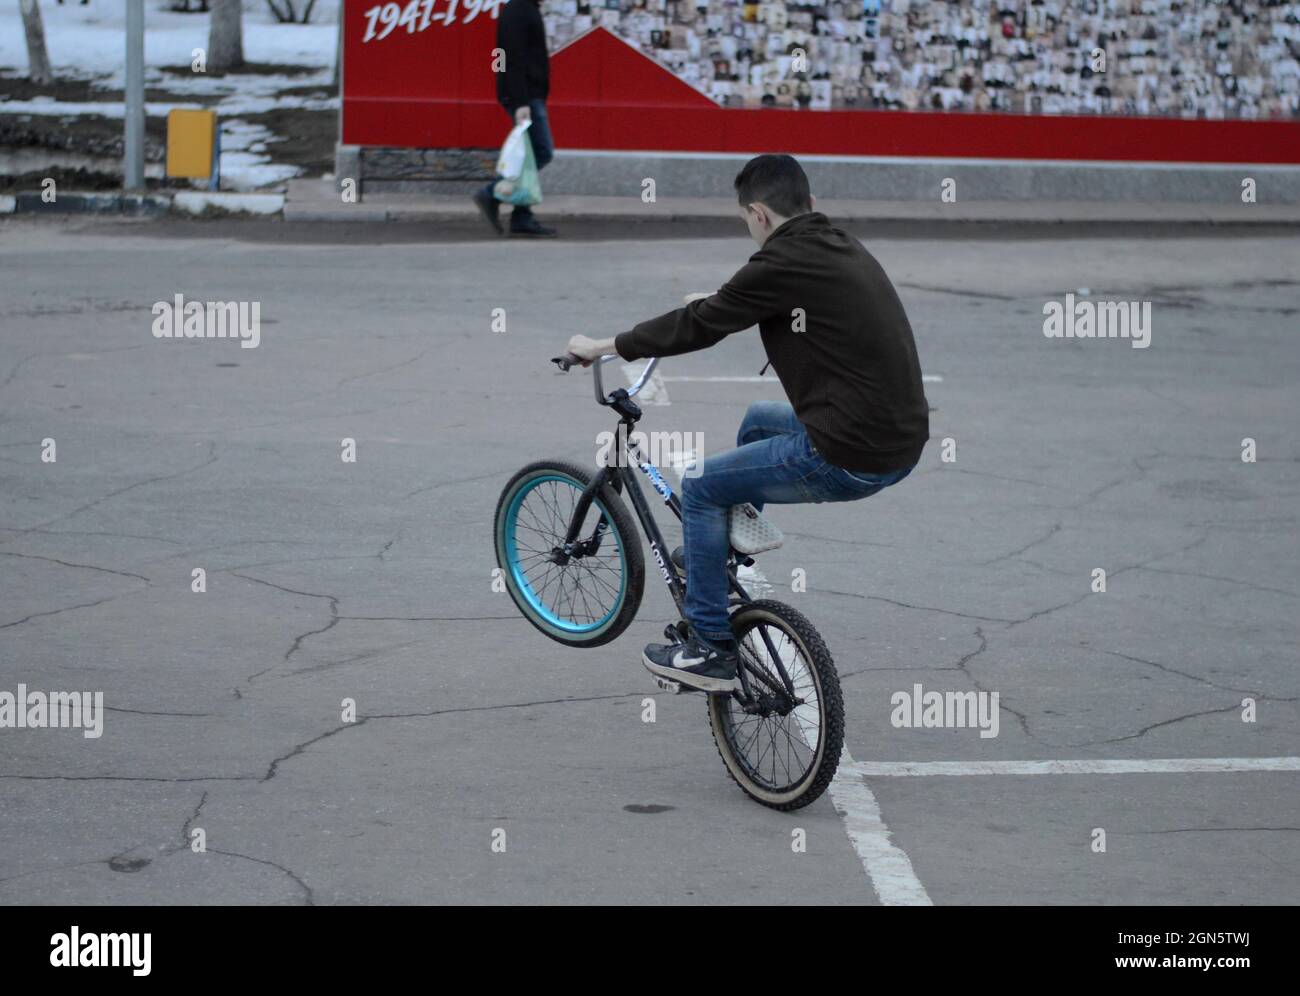 Kovrov, Russia. 12 March 2017. Teen on BMX bike performs a trick at the  Victory Square Stock Photo - Alamy